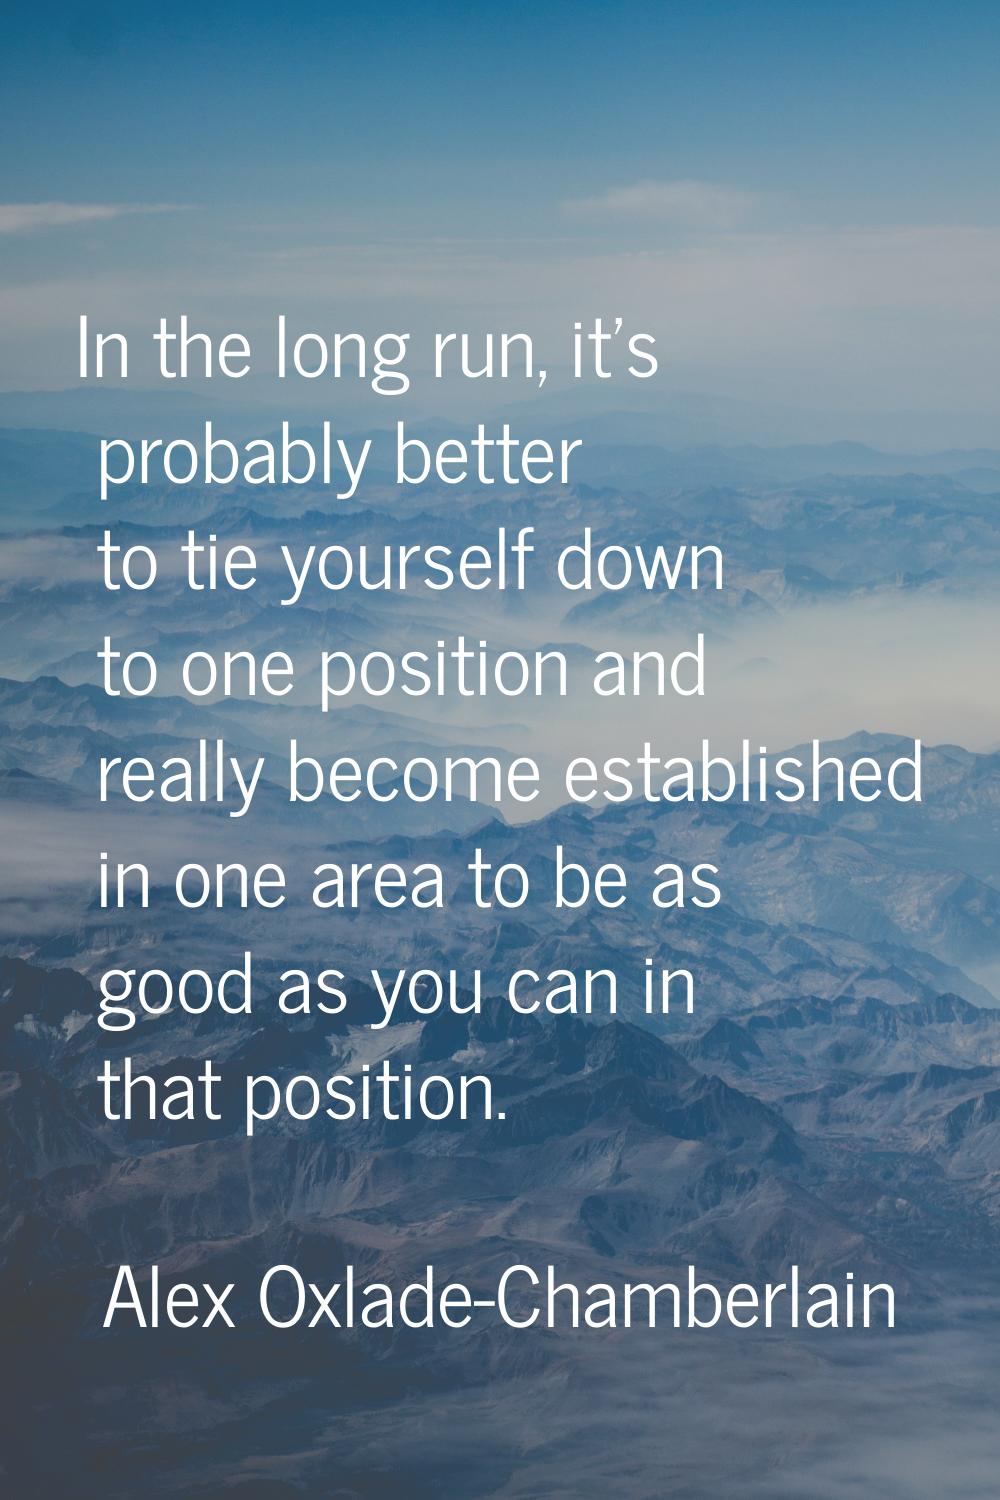 In the long run, it's probably better to tie yourself down to one position and really become establ